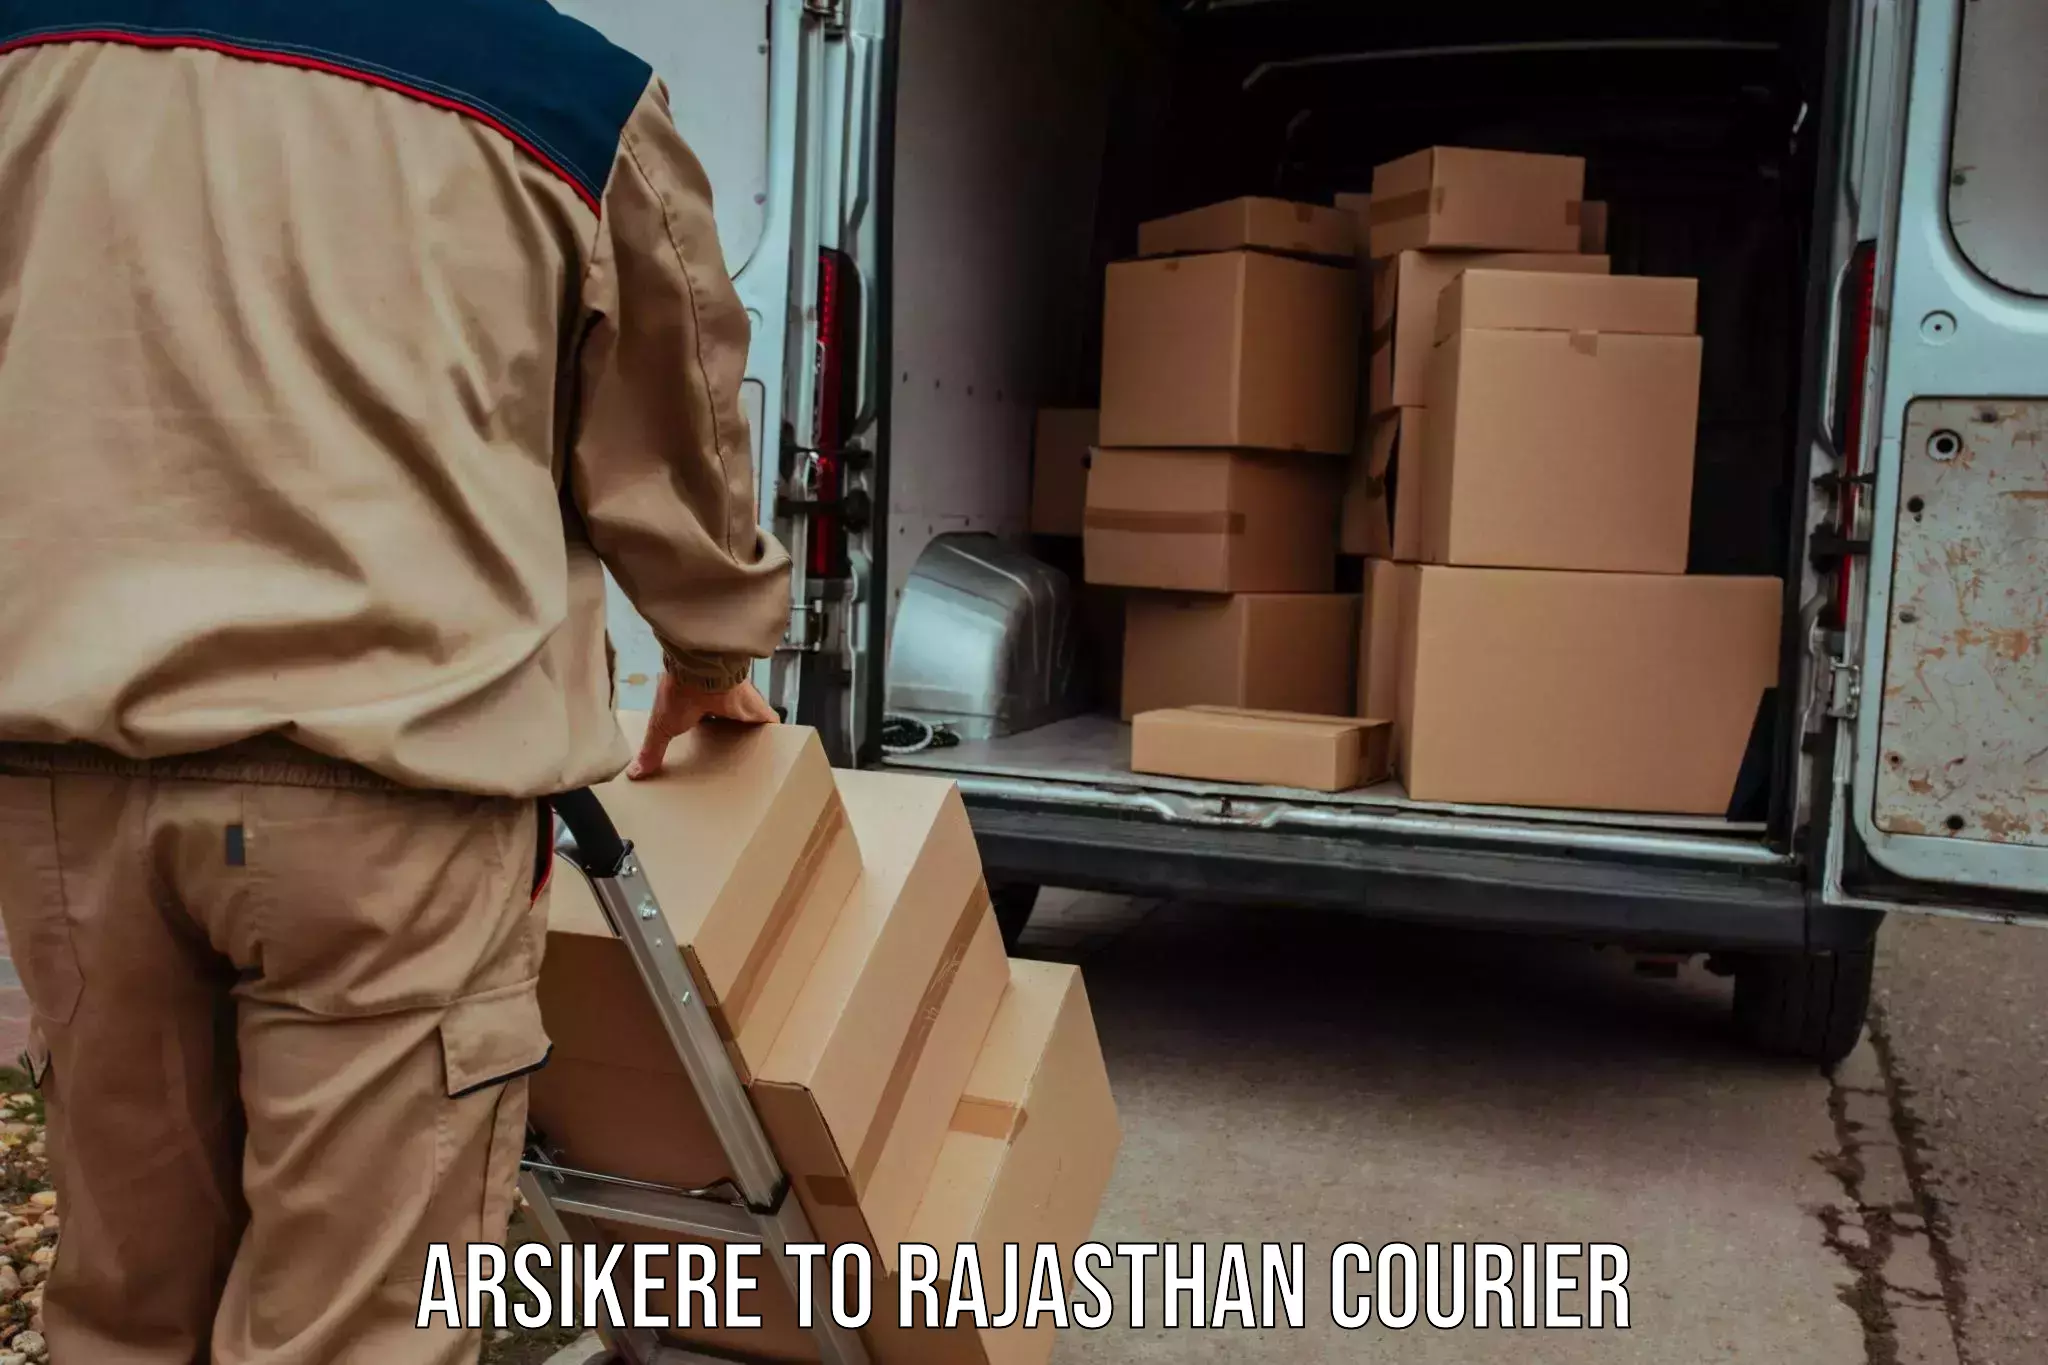 Next day courier Arsikere to Pokhran